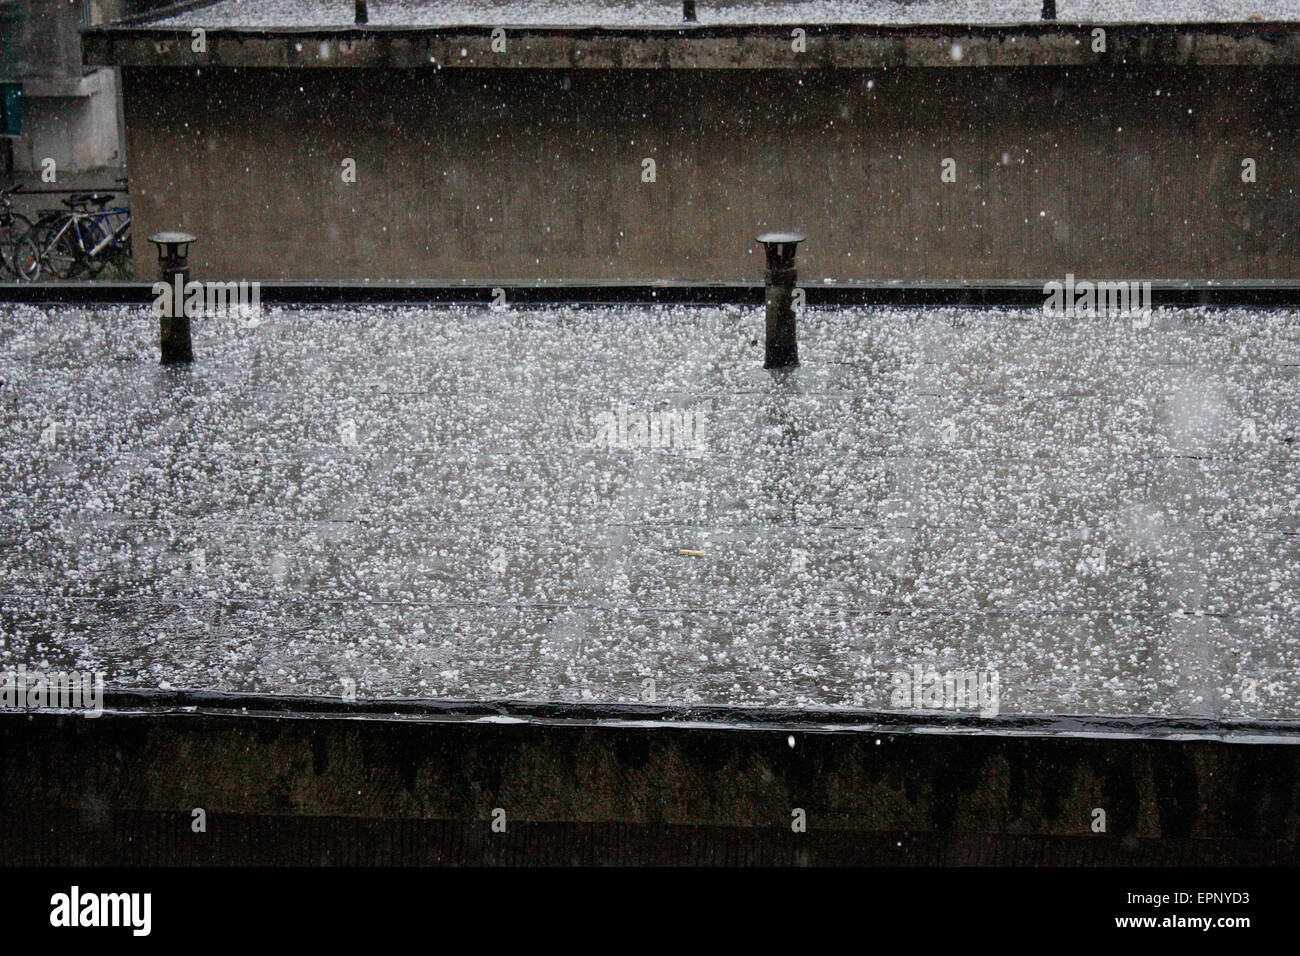 Turin, Italy. 20th May, 2015. The hailstorm covered with a white blanket the roof. © Elena Aquila/Pacific Press/Alamy Live News Stock Photo